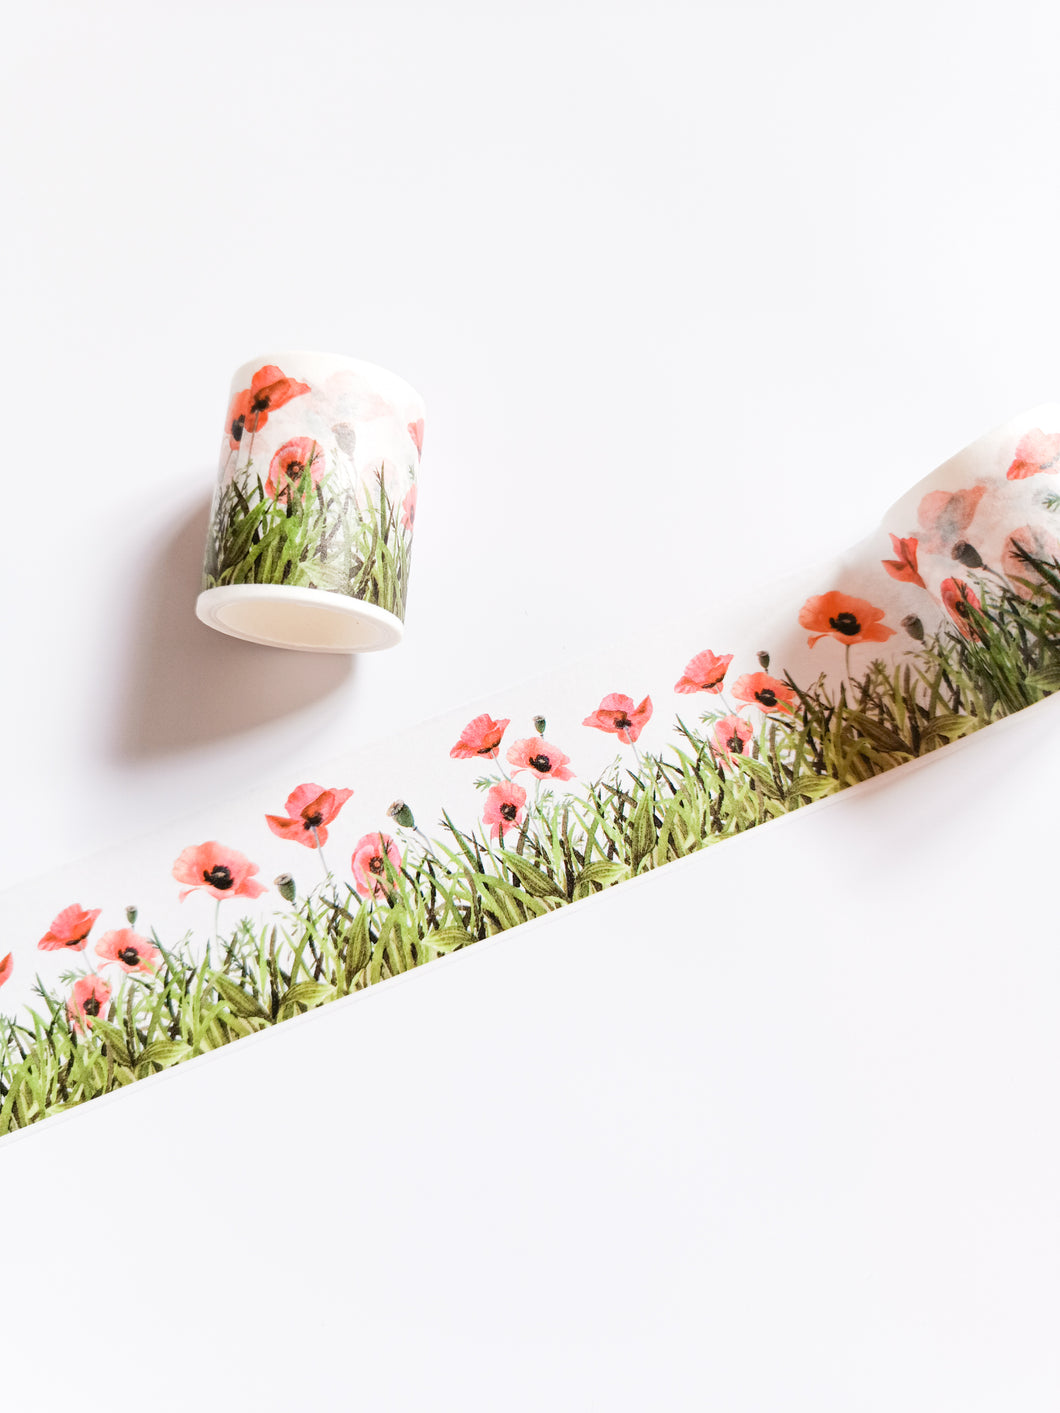 Poppy Field Washi Tape with red poppies on a white surface, GretelCreates 40mm Wildflower Decorative Tape.